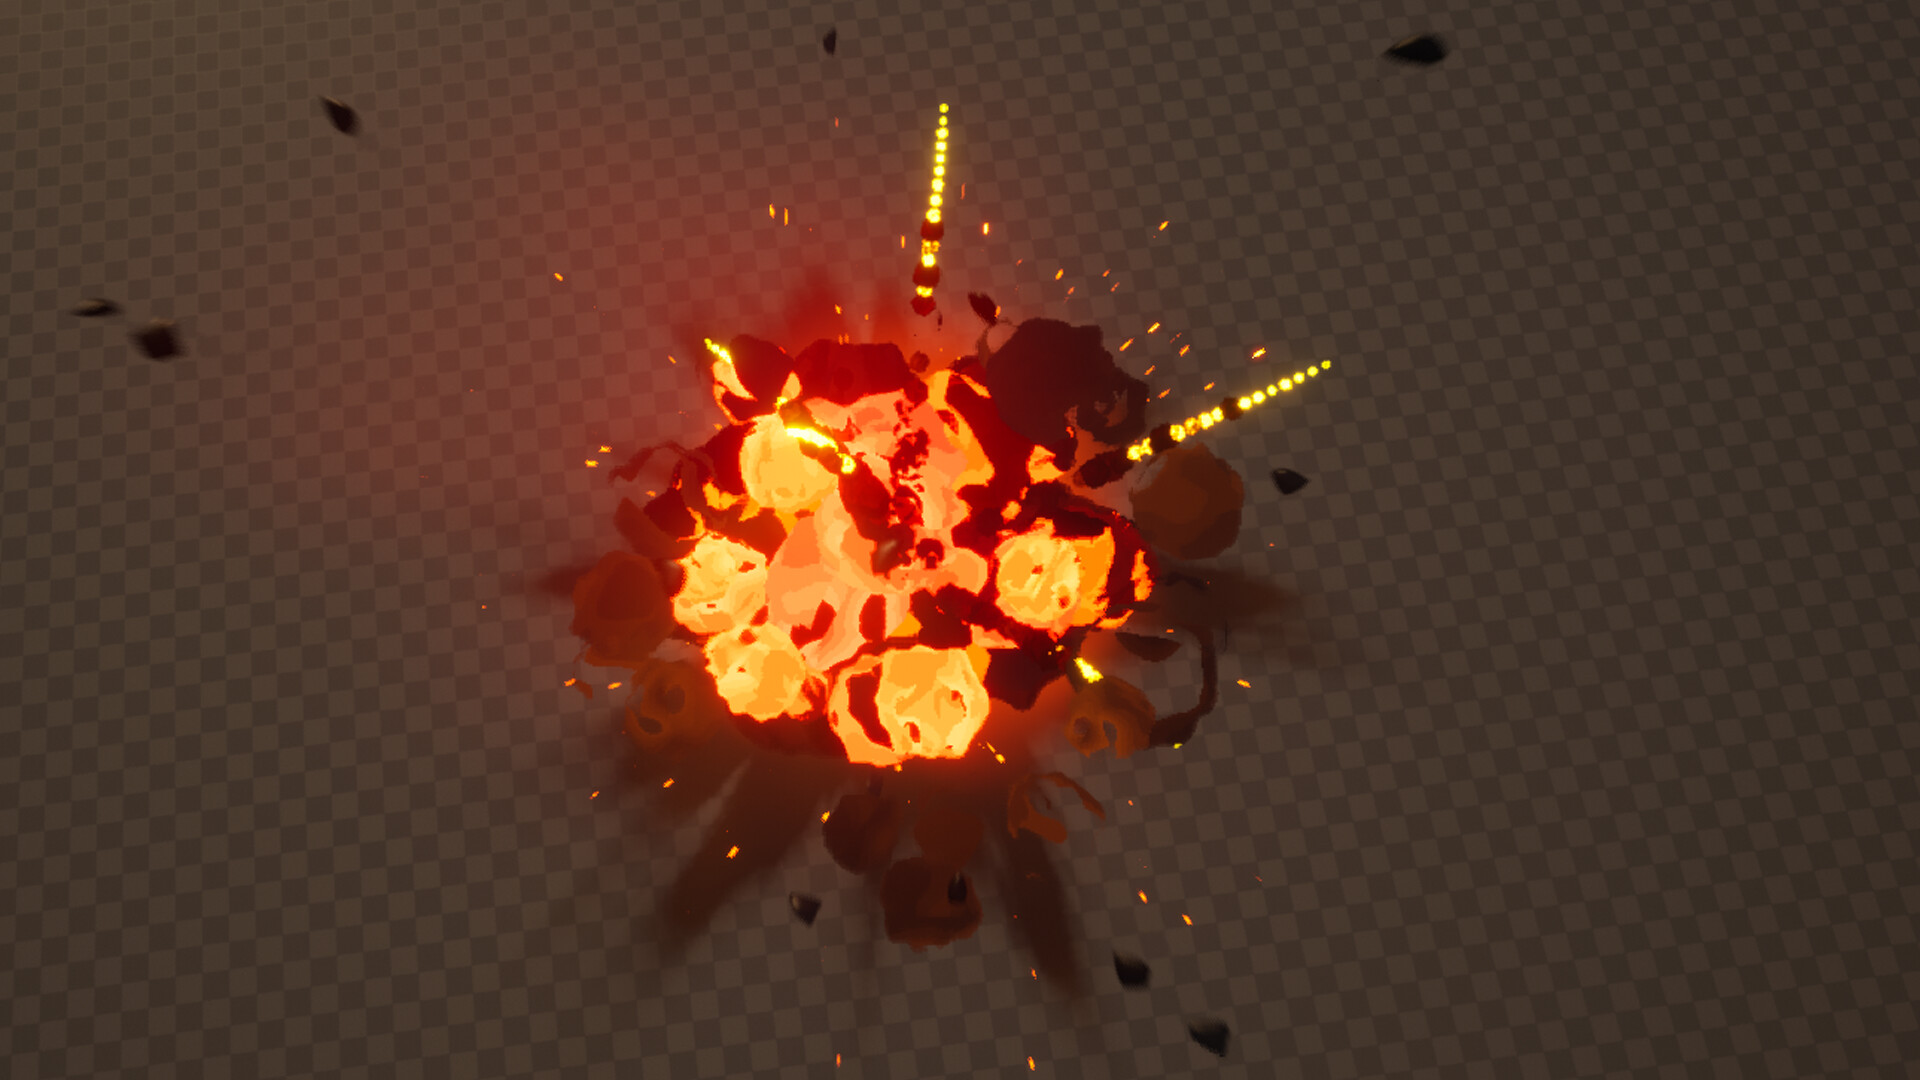 Explosion Effect 4